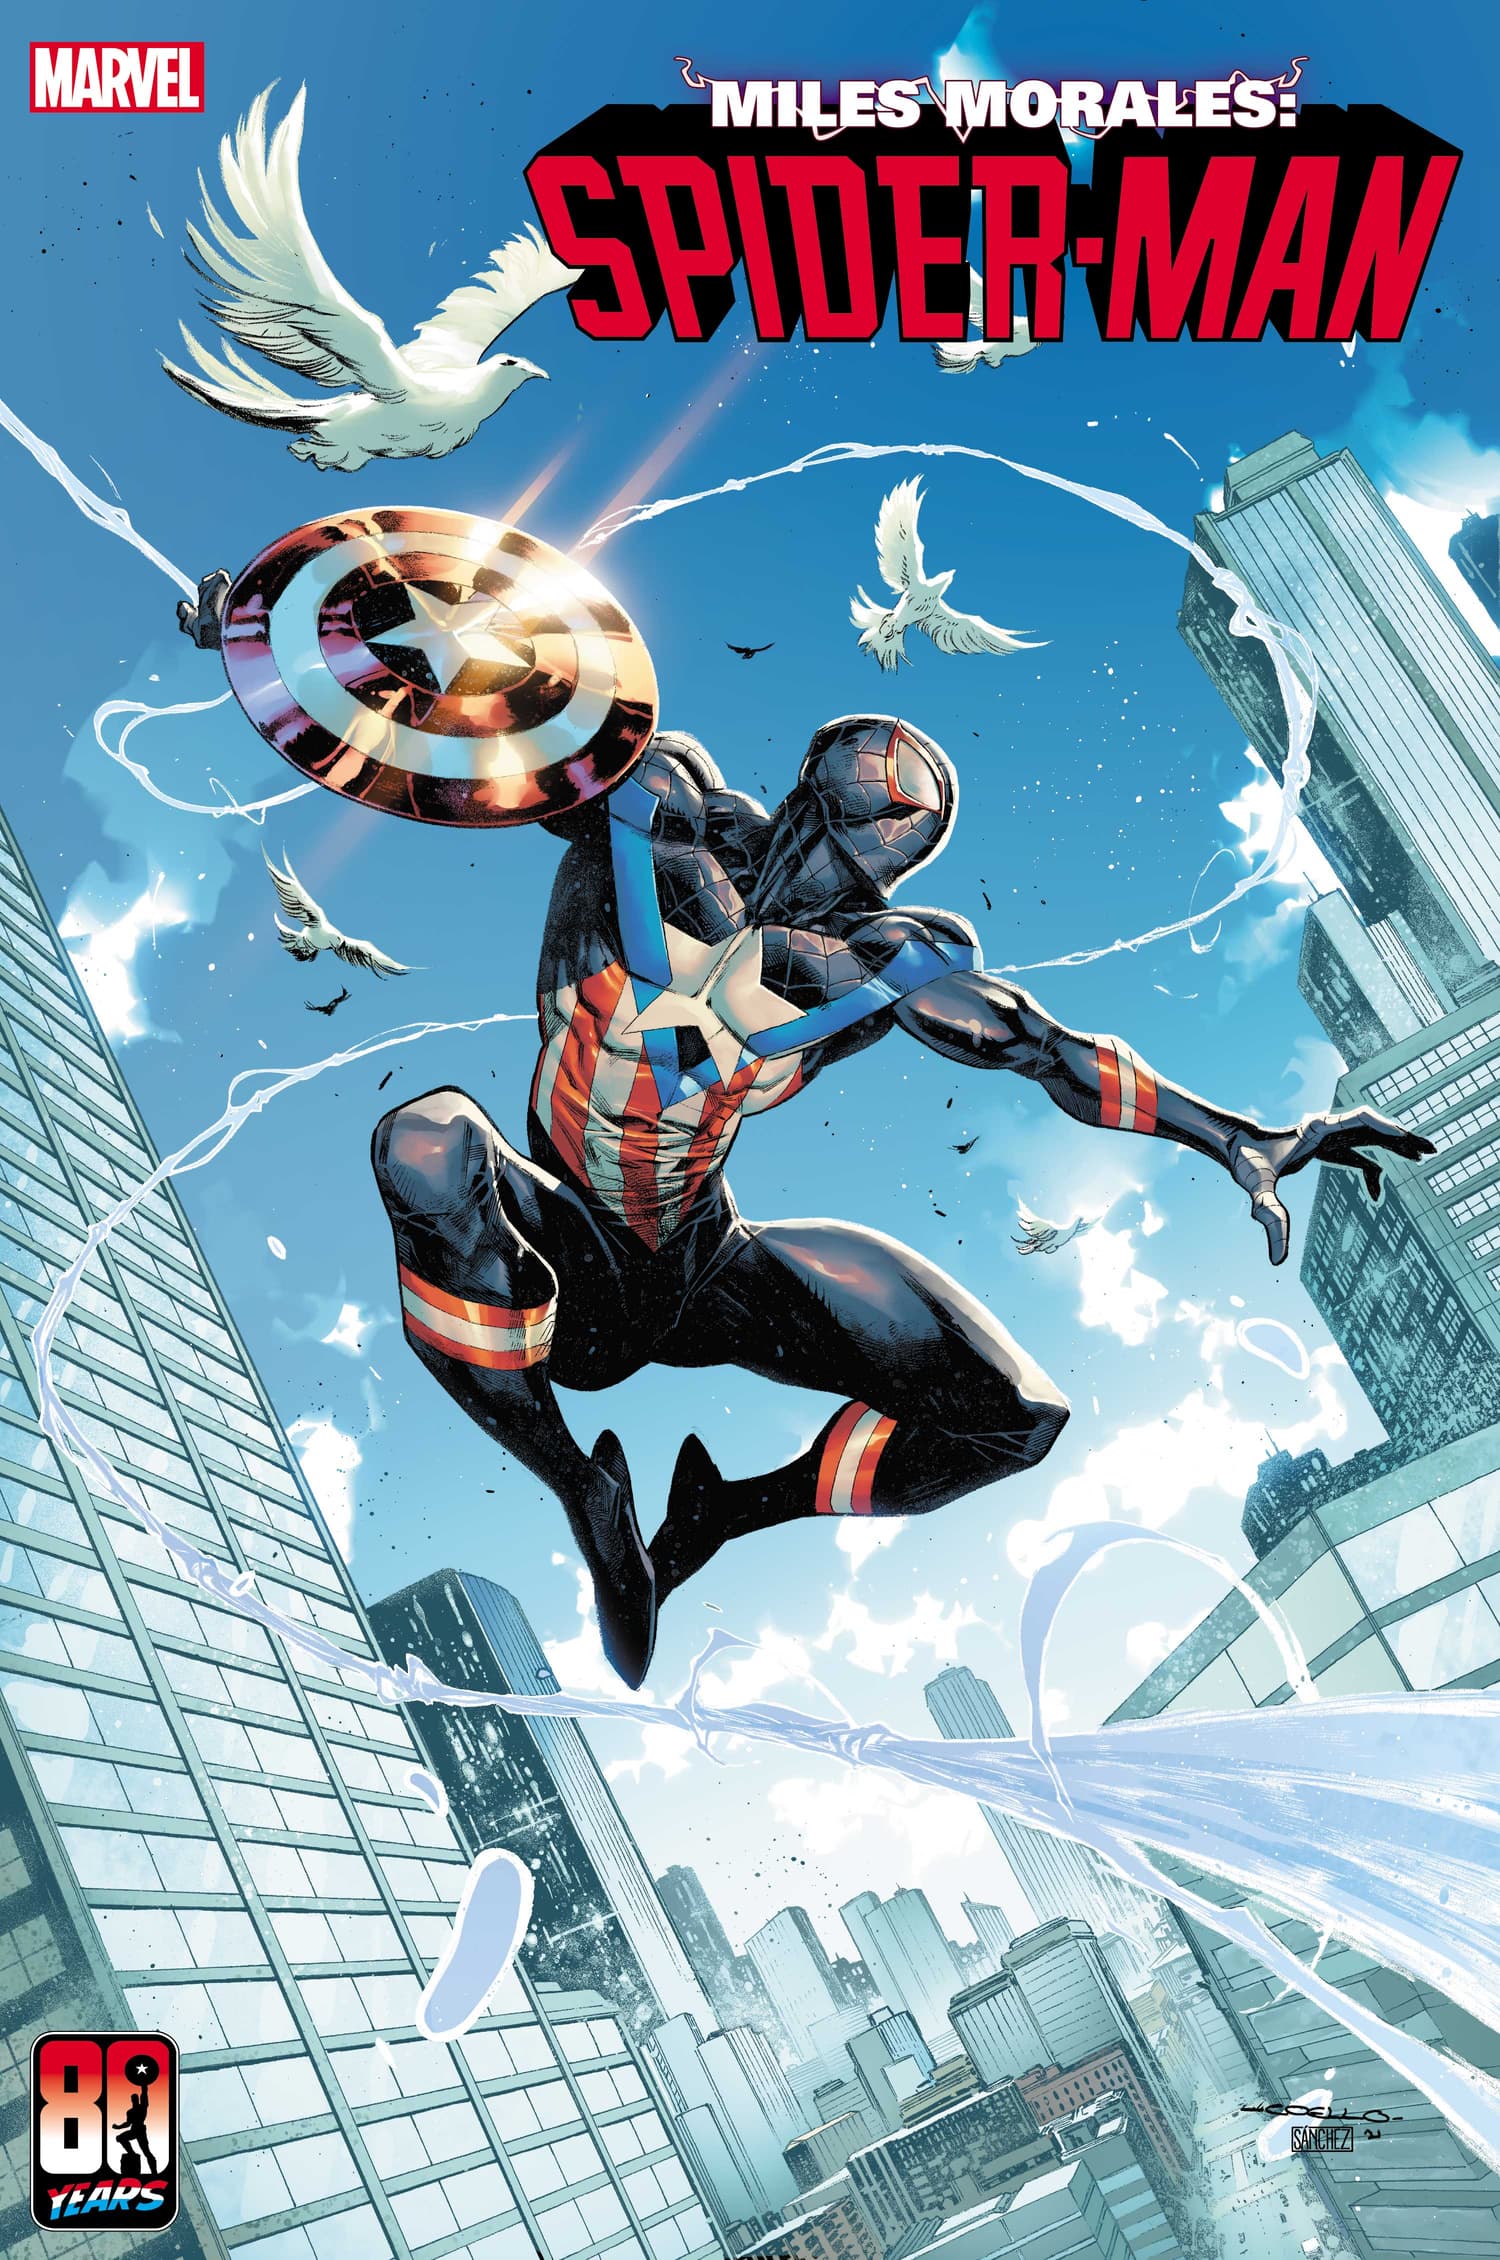 MILES MORALES: SPIDER-MAN #28 CAPTAIN AMERICA 80TH VARIANT COVER by IBAN COELLO & ALEJANDRO SÀNCHEZ